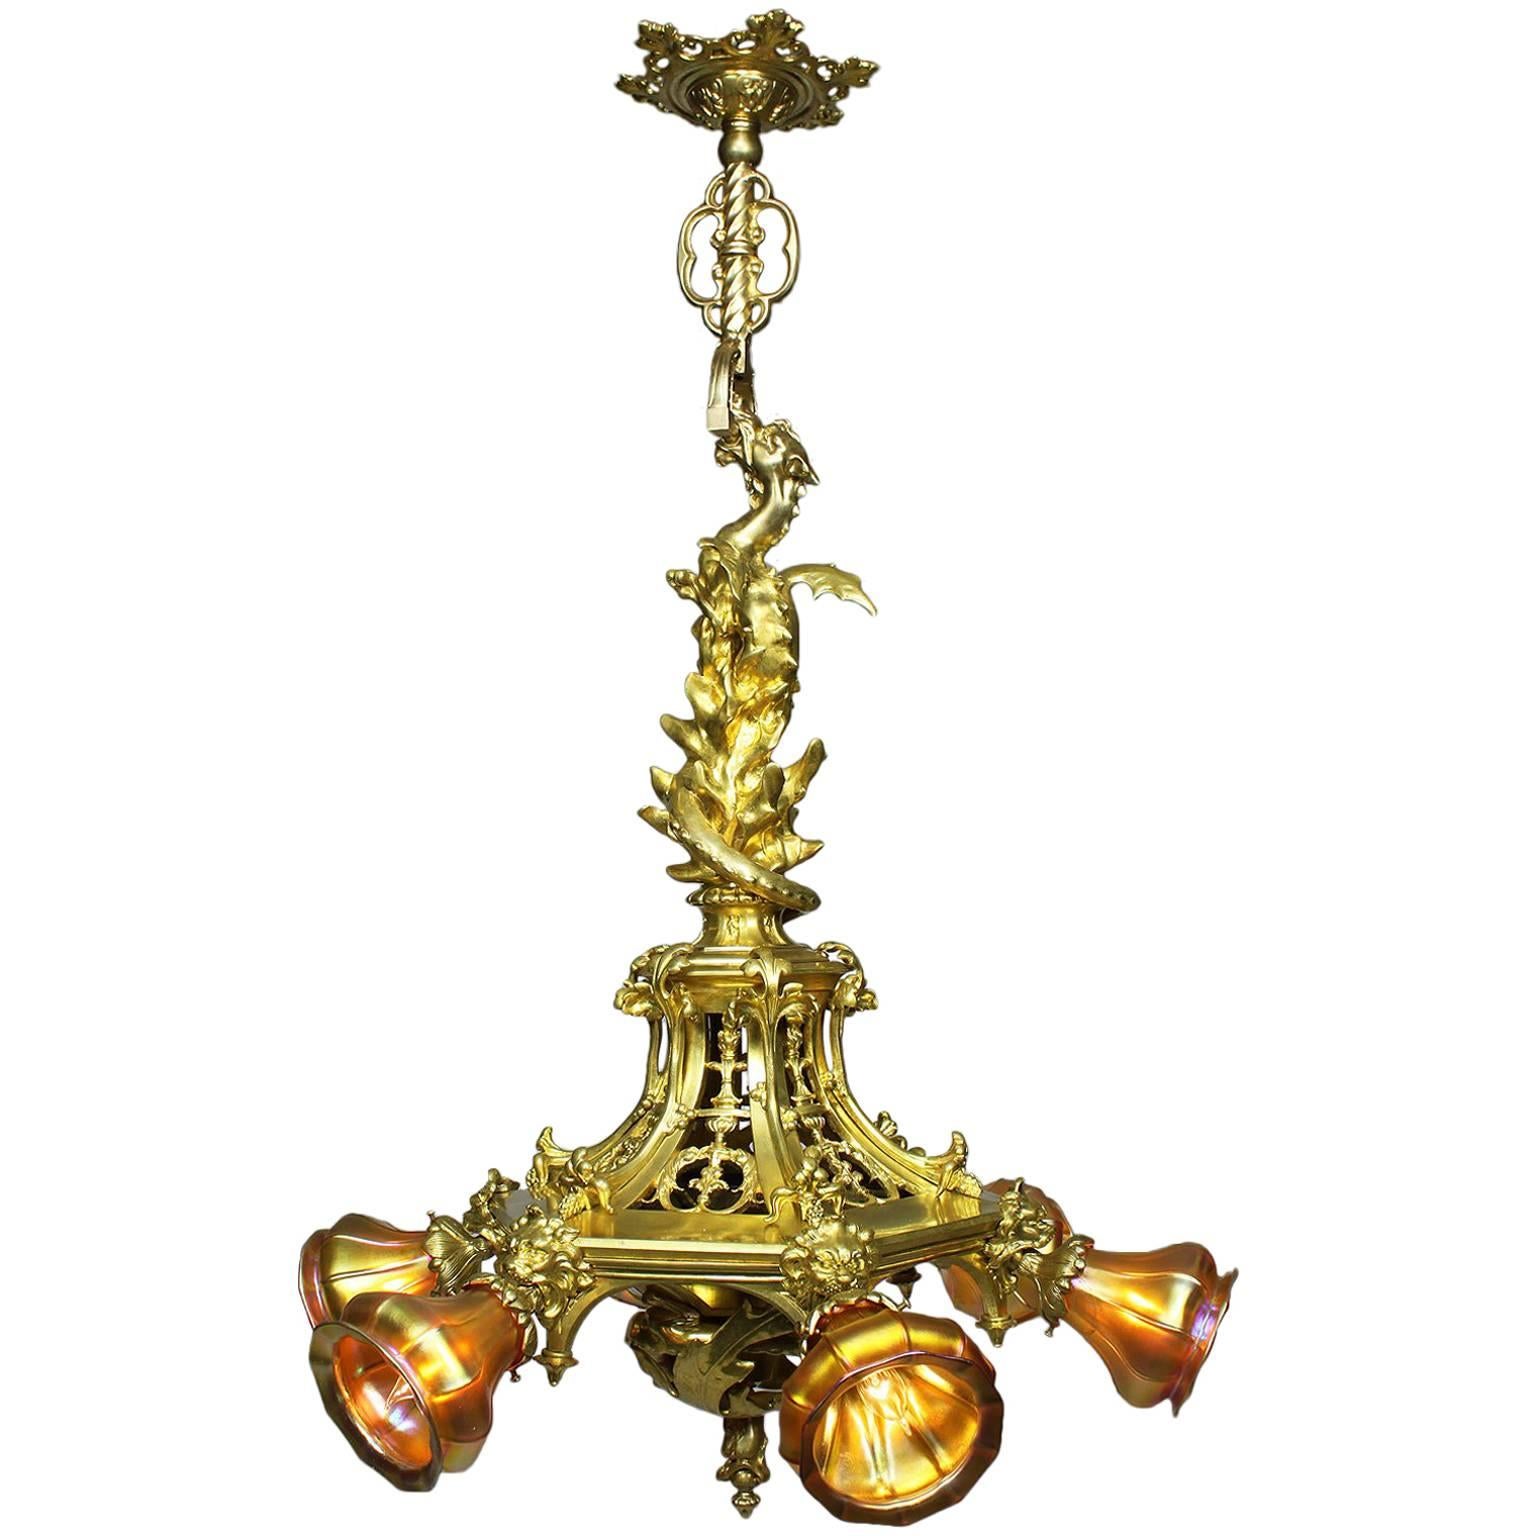 American Gothic-Revival Gilt-Bronze "Dragon" Chandelier in the Manner of Tiffany For Sale